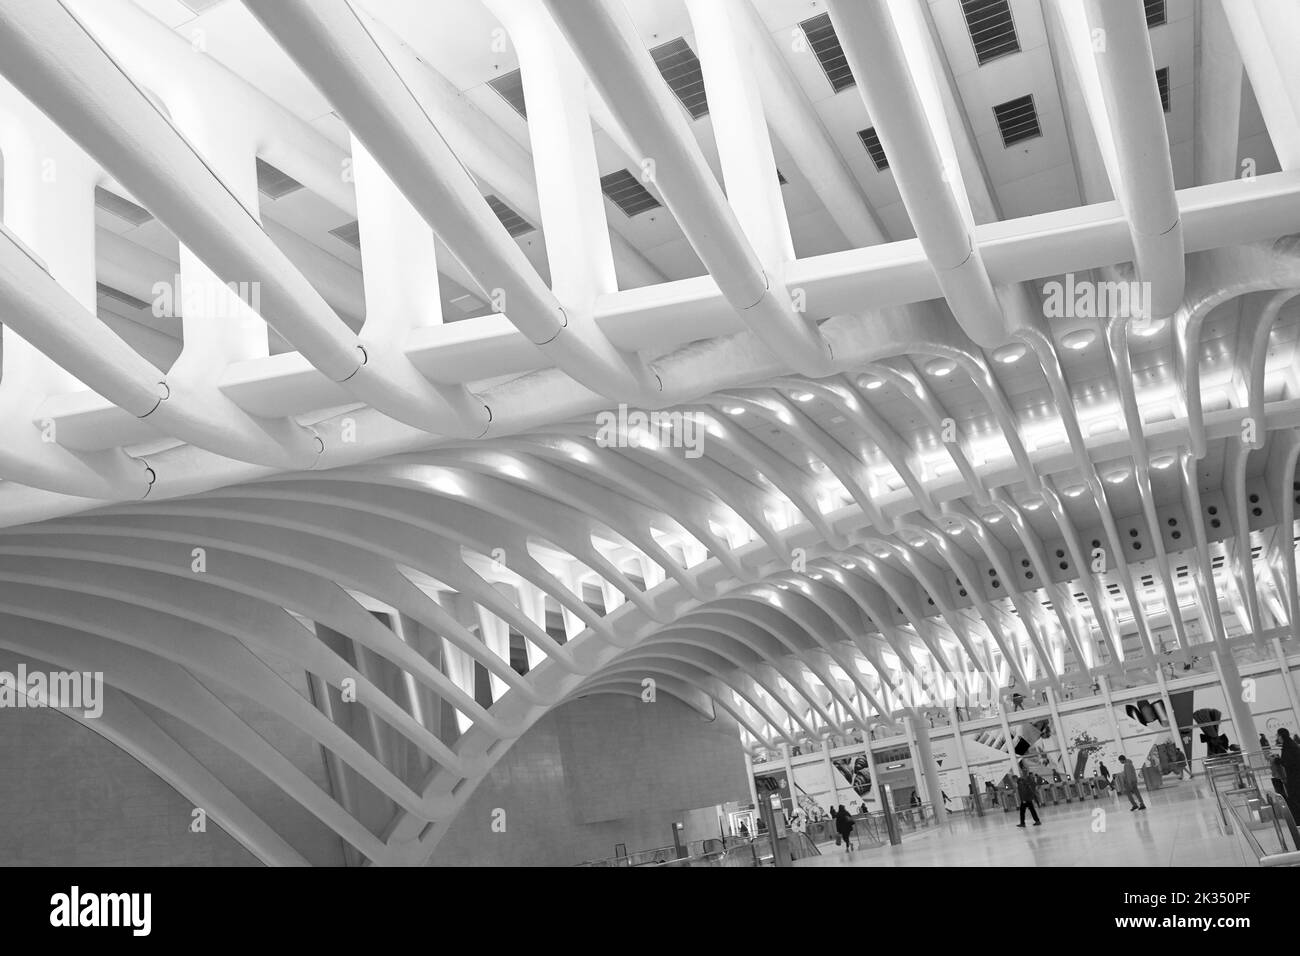 Detail of the bones or spine in the interior of the Oculus at The World Trade Center in Manhattan, NYC Stock Photo